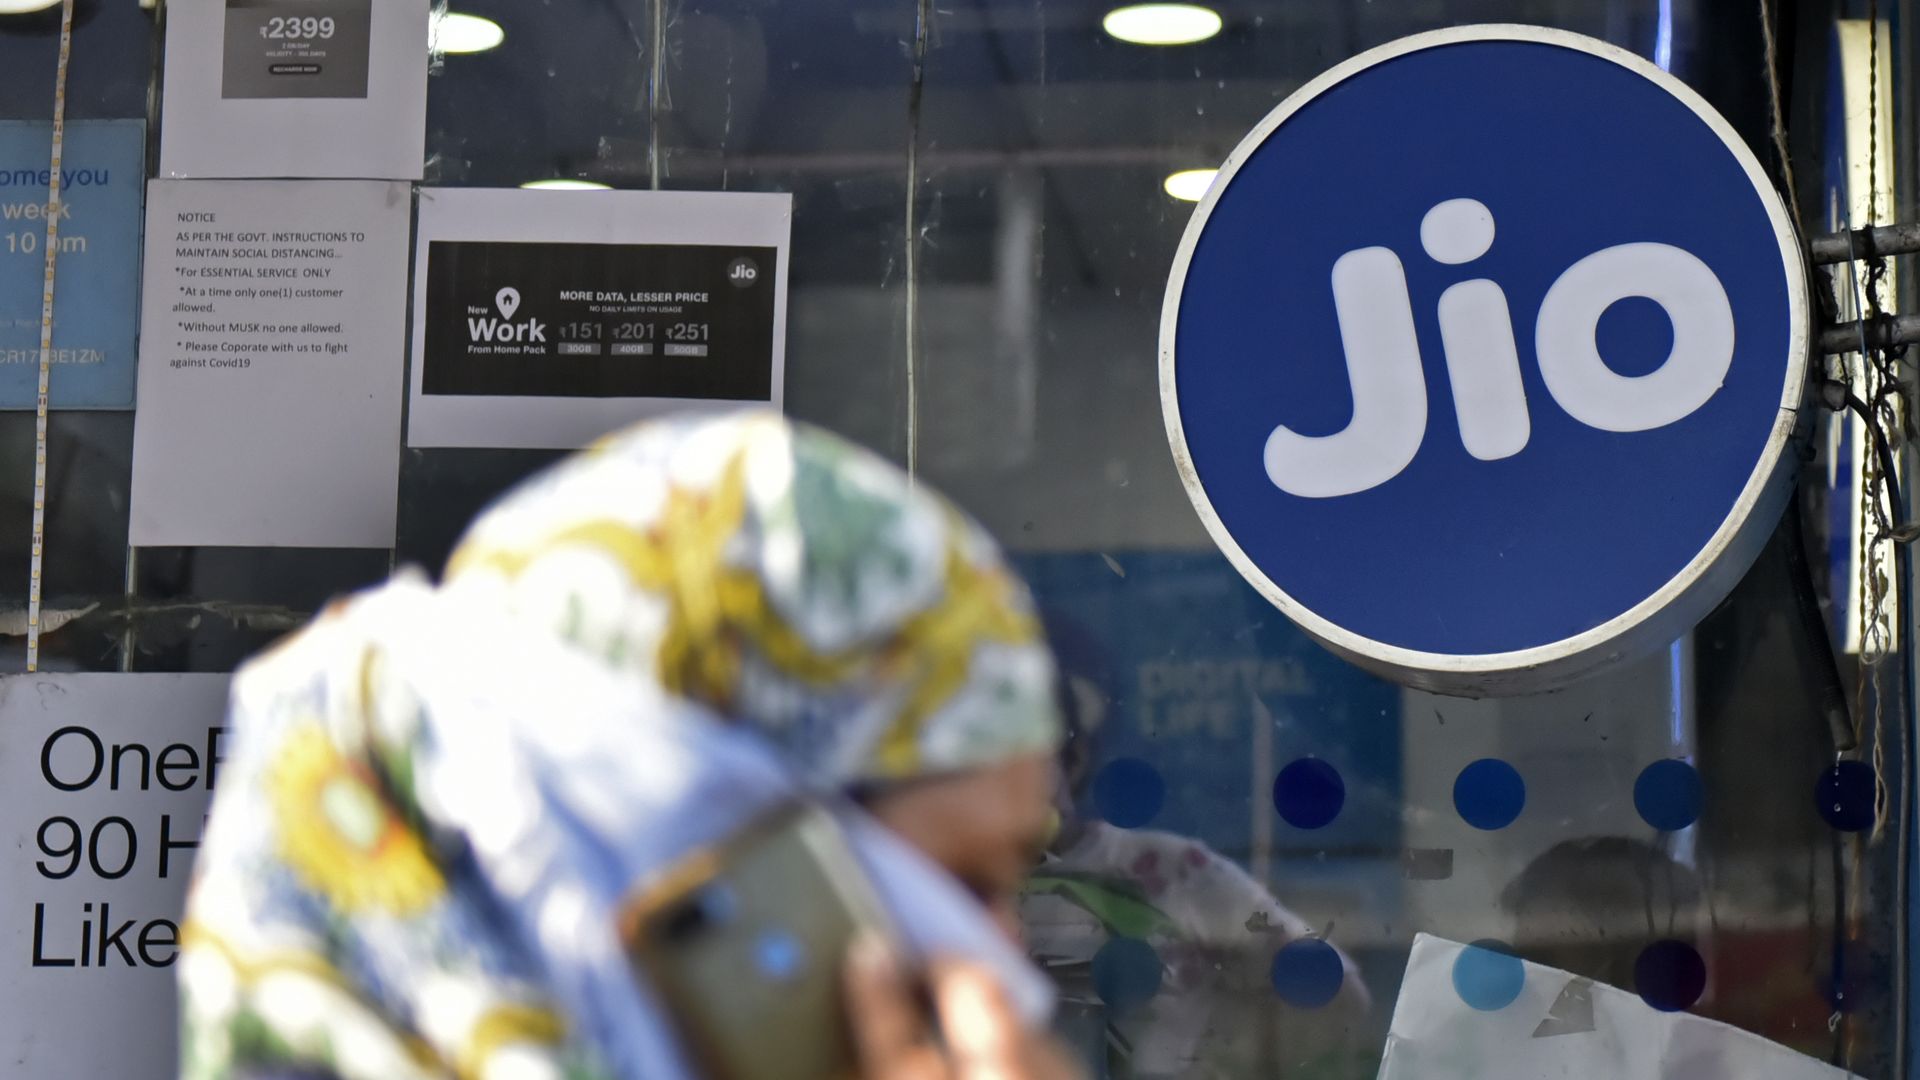 A woman talking on a cellular phone walks past a Jio store in Kolkata, India.